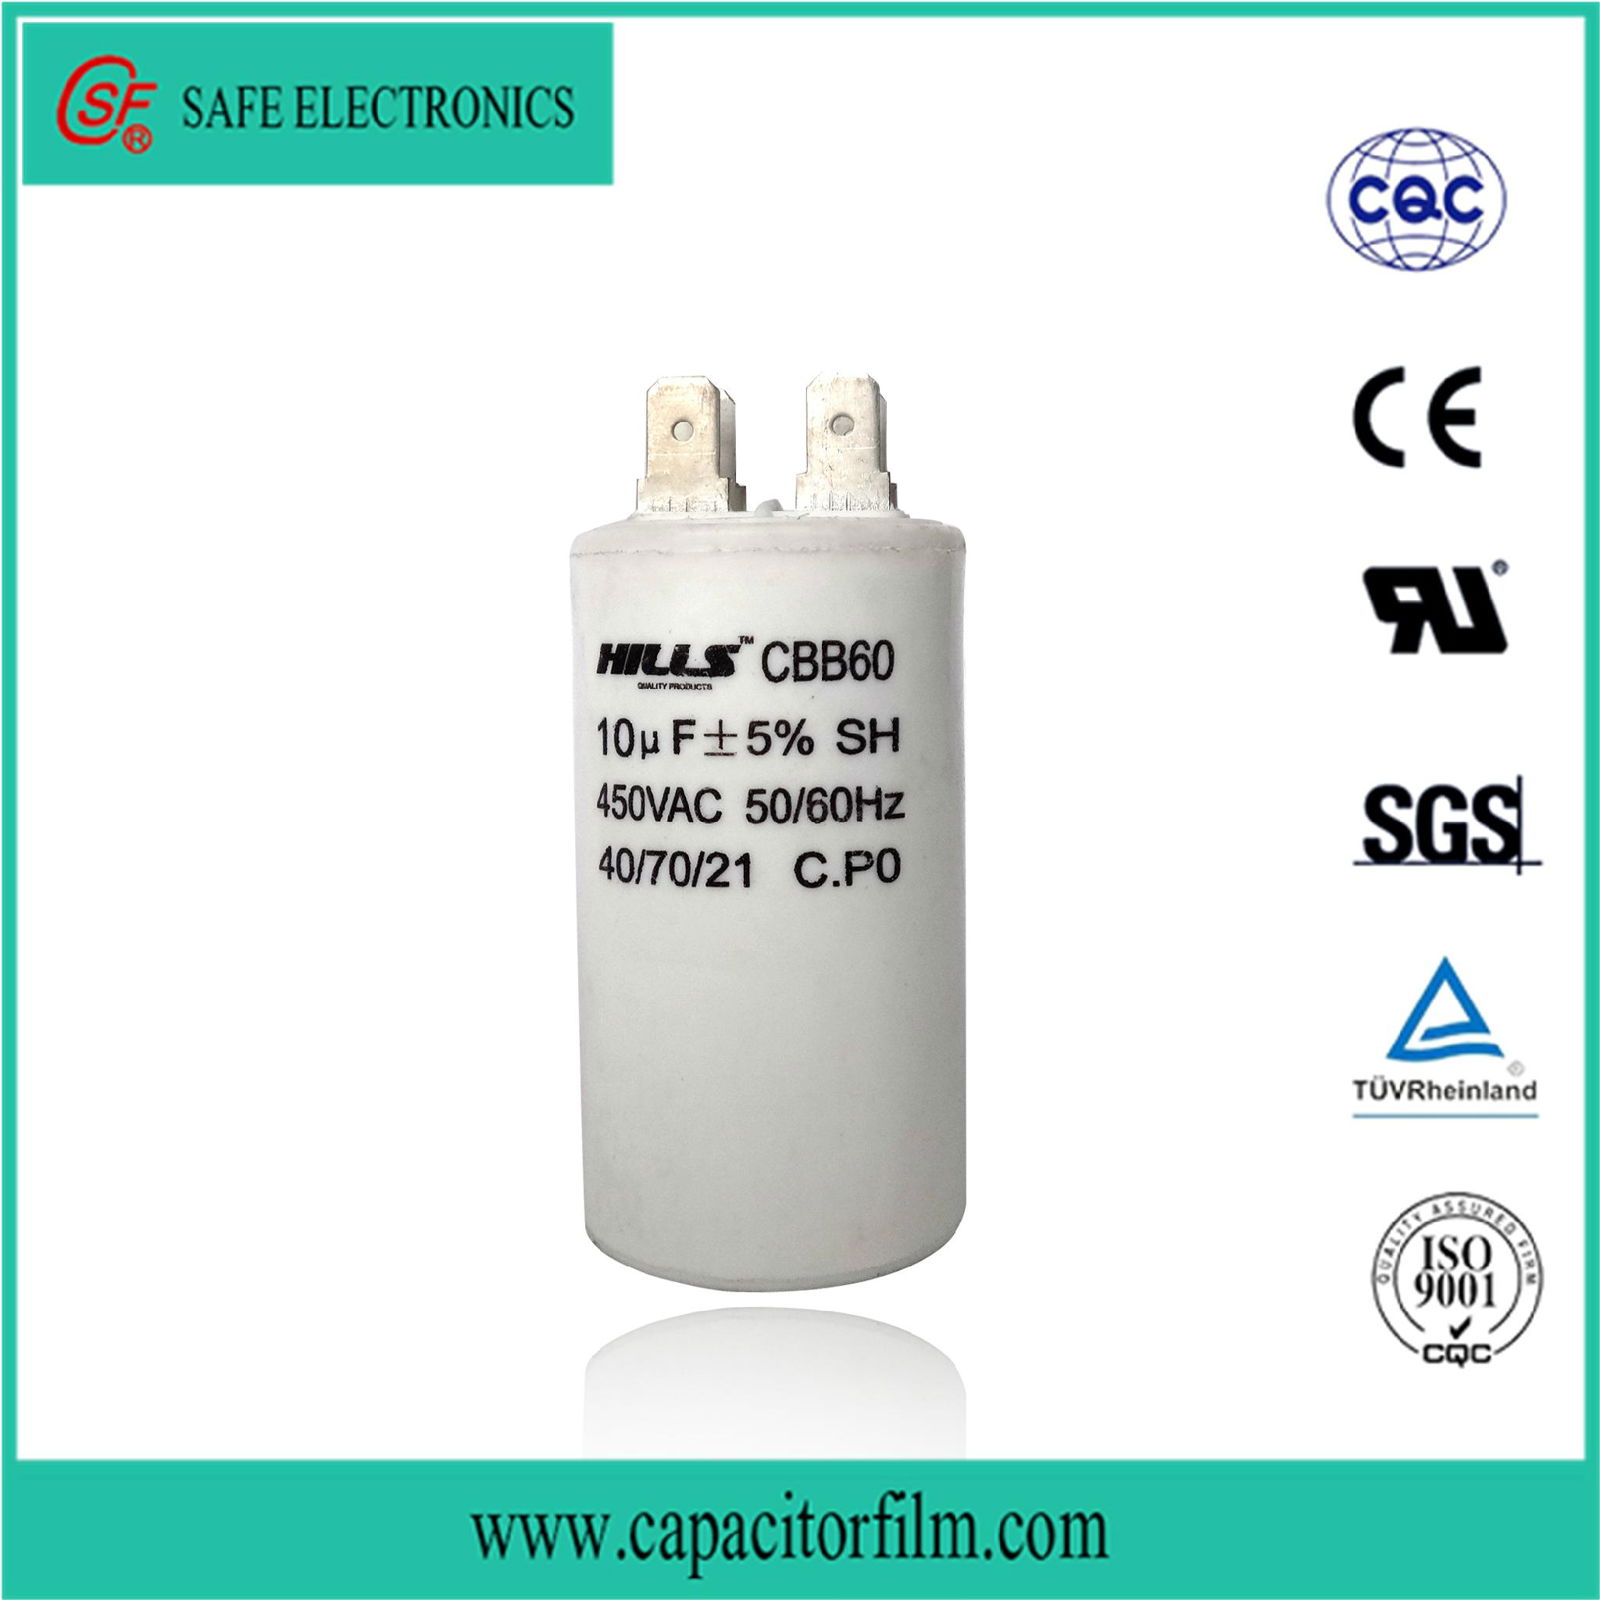 High insolation resistance motor cbb60 capacitor with ISO9001 ROHS 4